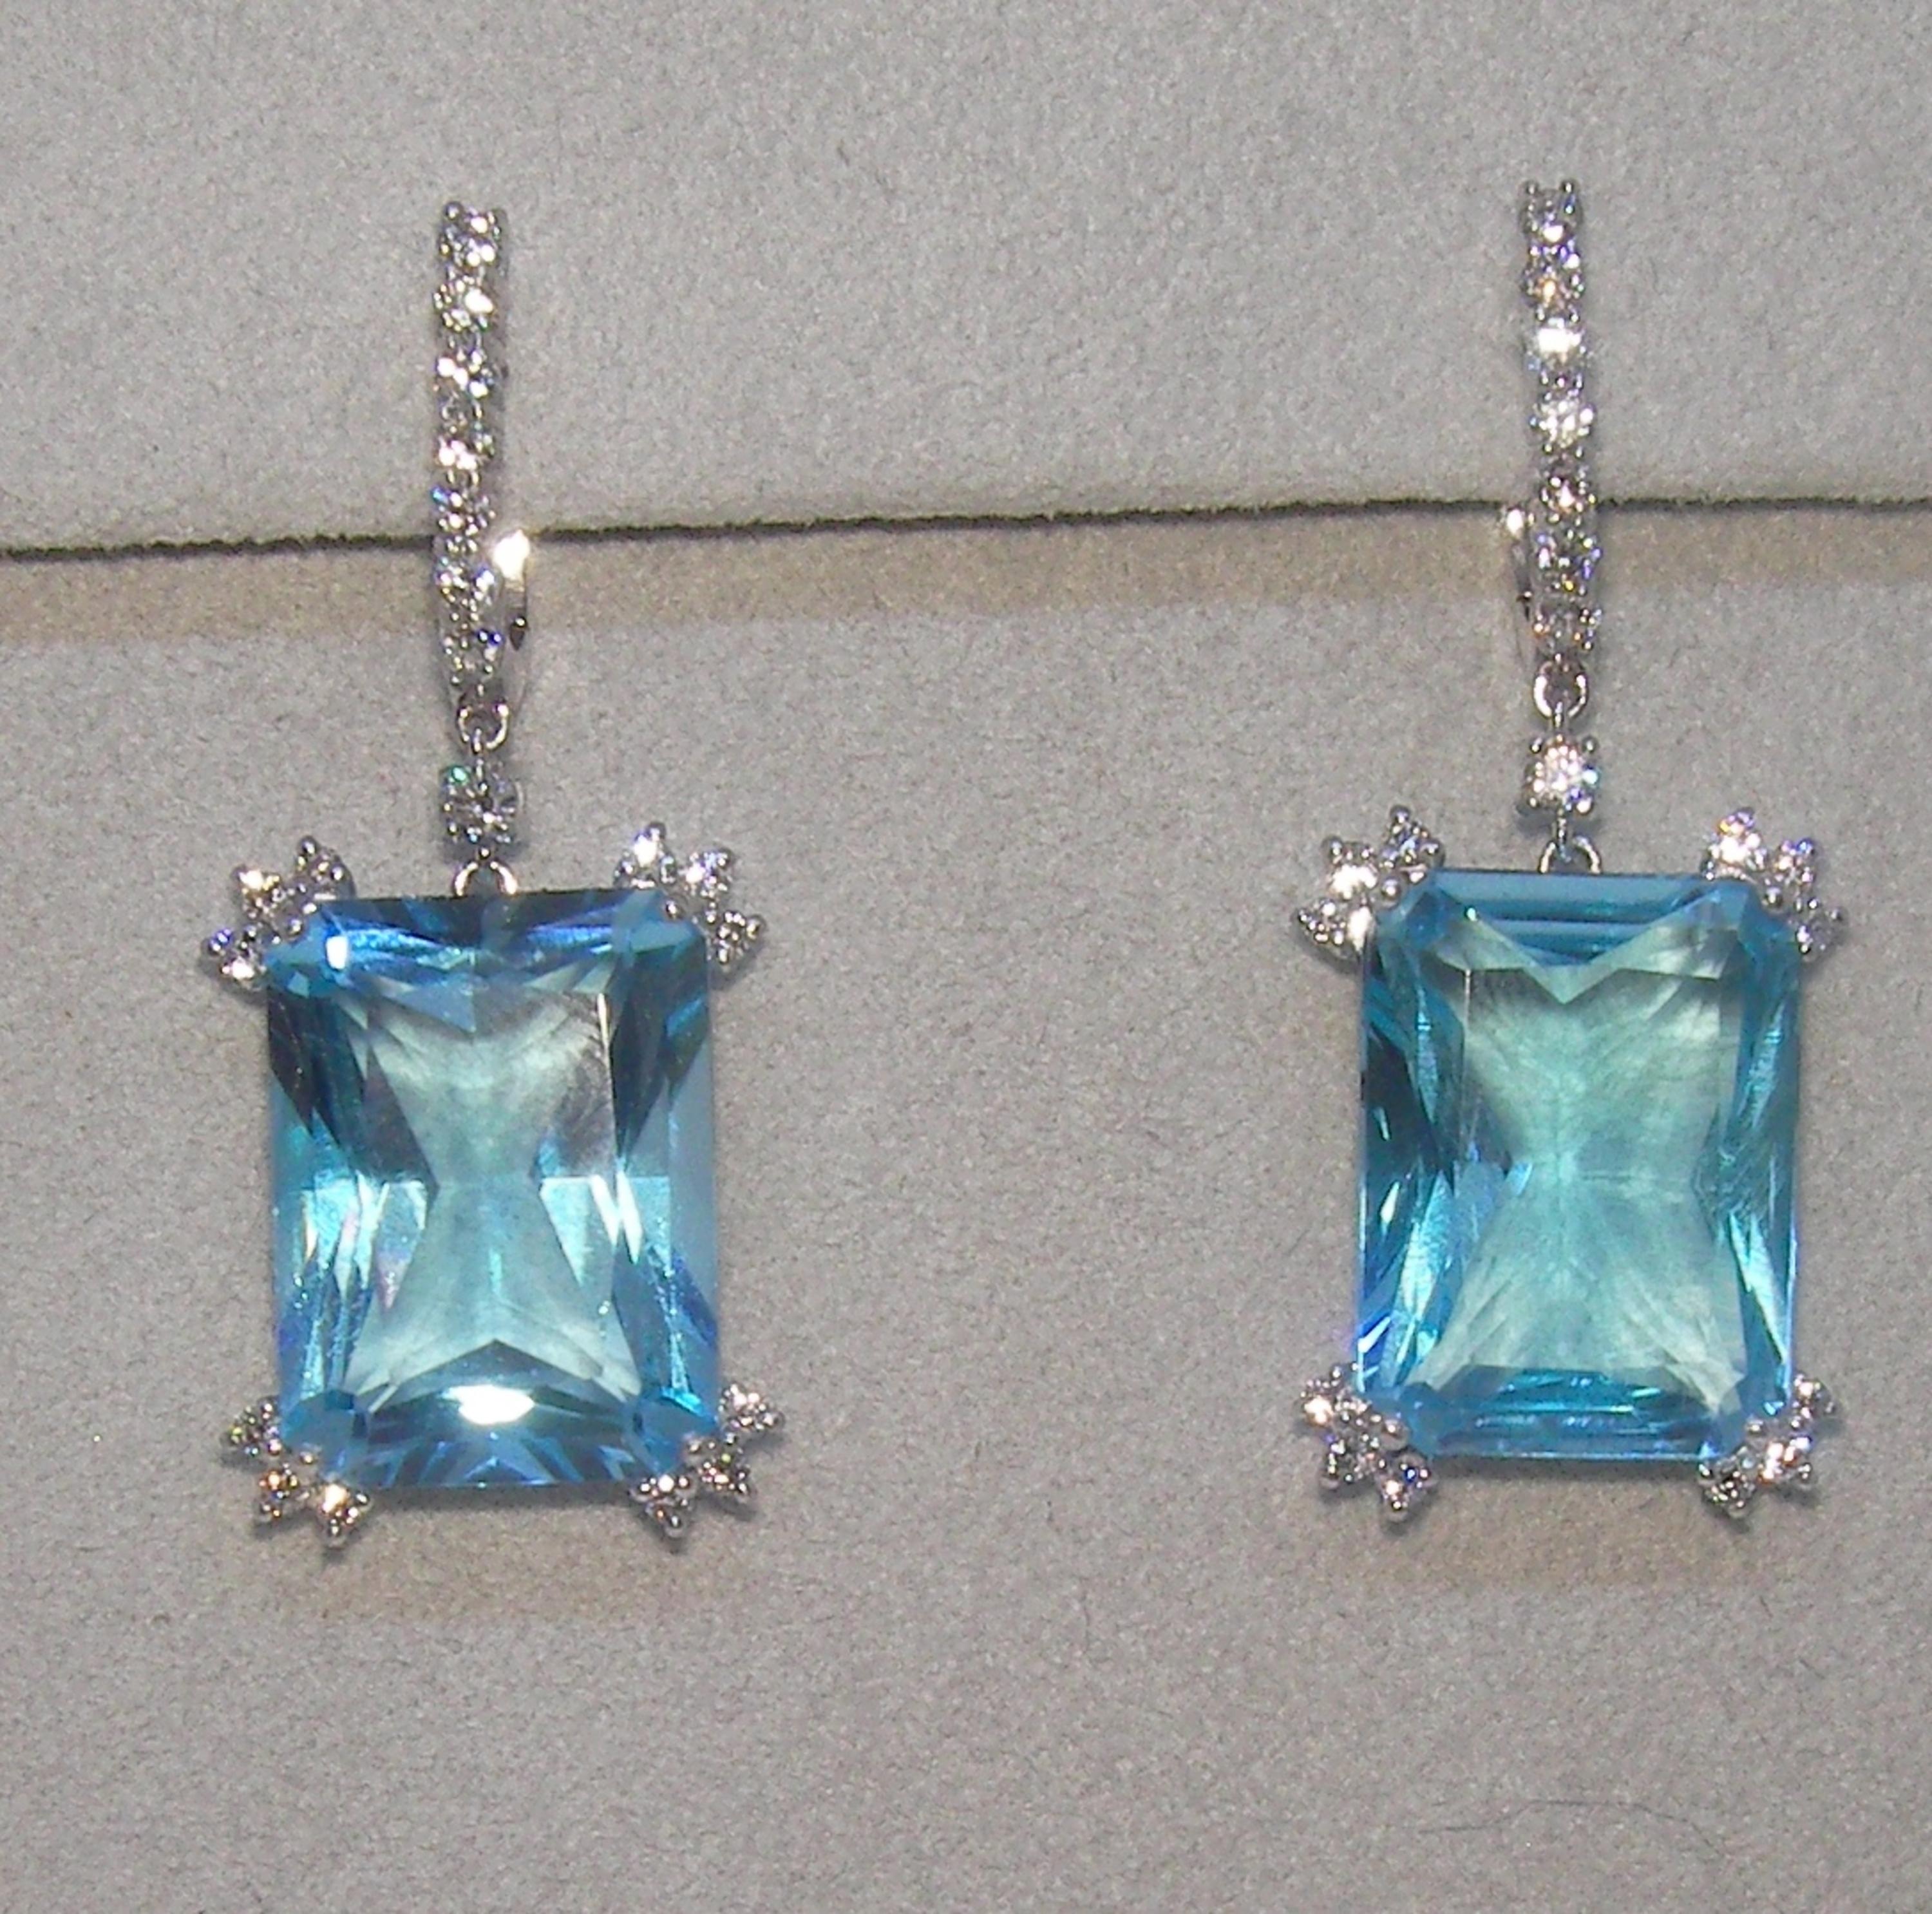 18 Karat White Gold Diamond and Blue Topaz Dangle Earrings

40 Diam. 0.63 Carat
2 Topaz 24.35 Carat
























34 Blue Topaz 17.36 Carats 
168 Diamonds 0.78 Carats


Founded in 1974, Gianni Lazzaro is a family-owned jewelery company